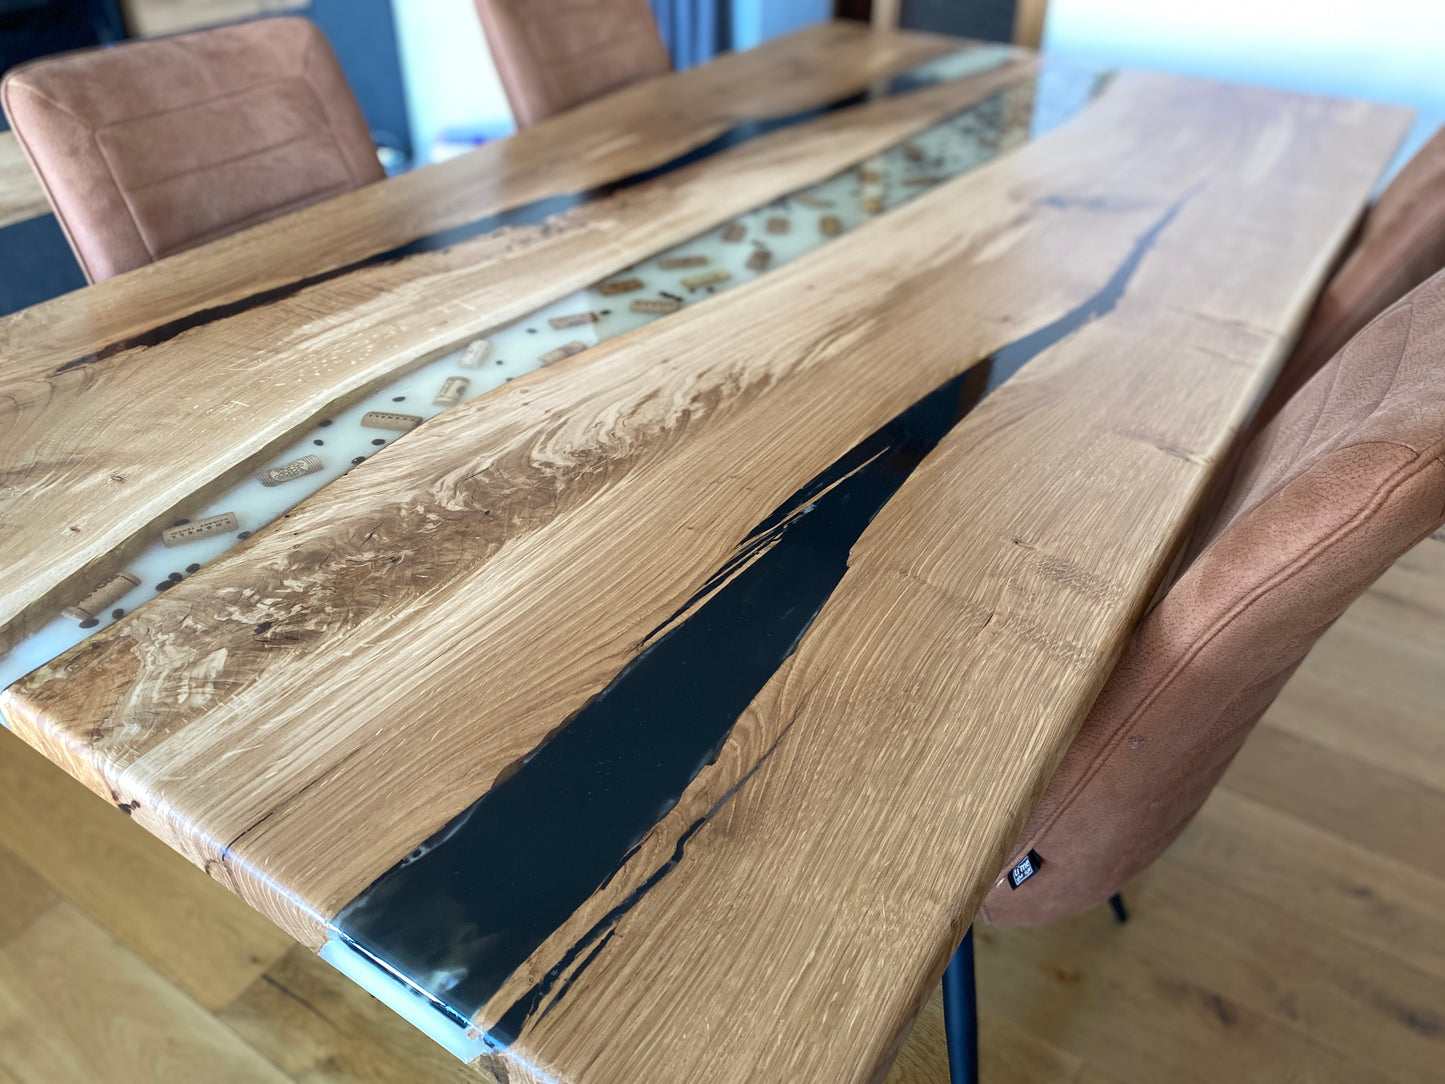 Stylish table made of Maple wood and epoxy resin - River table